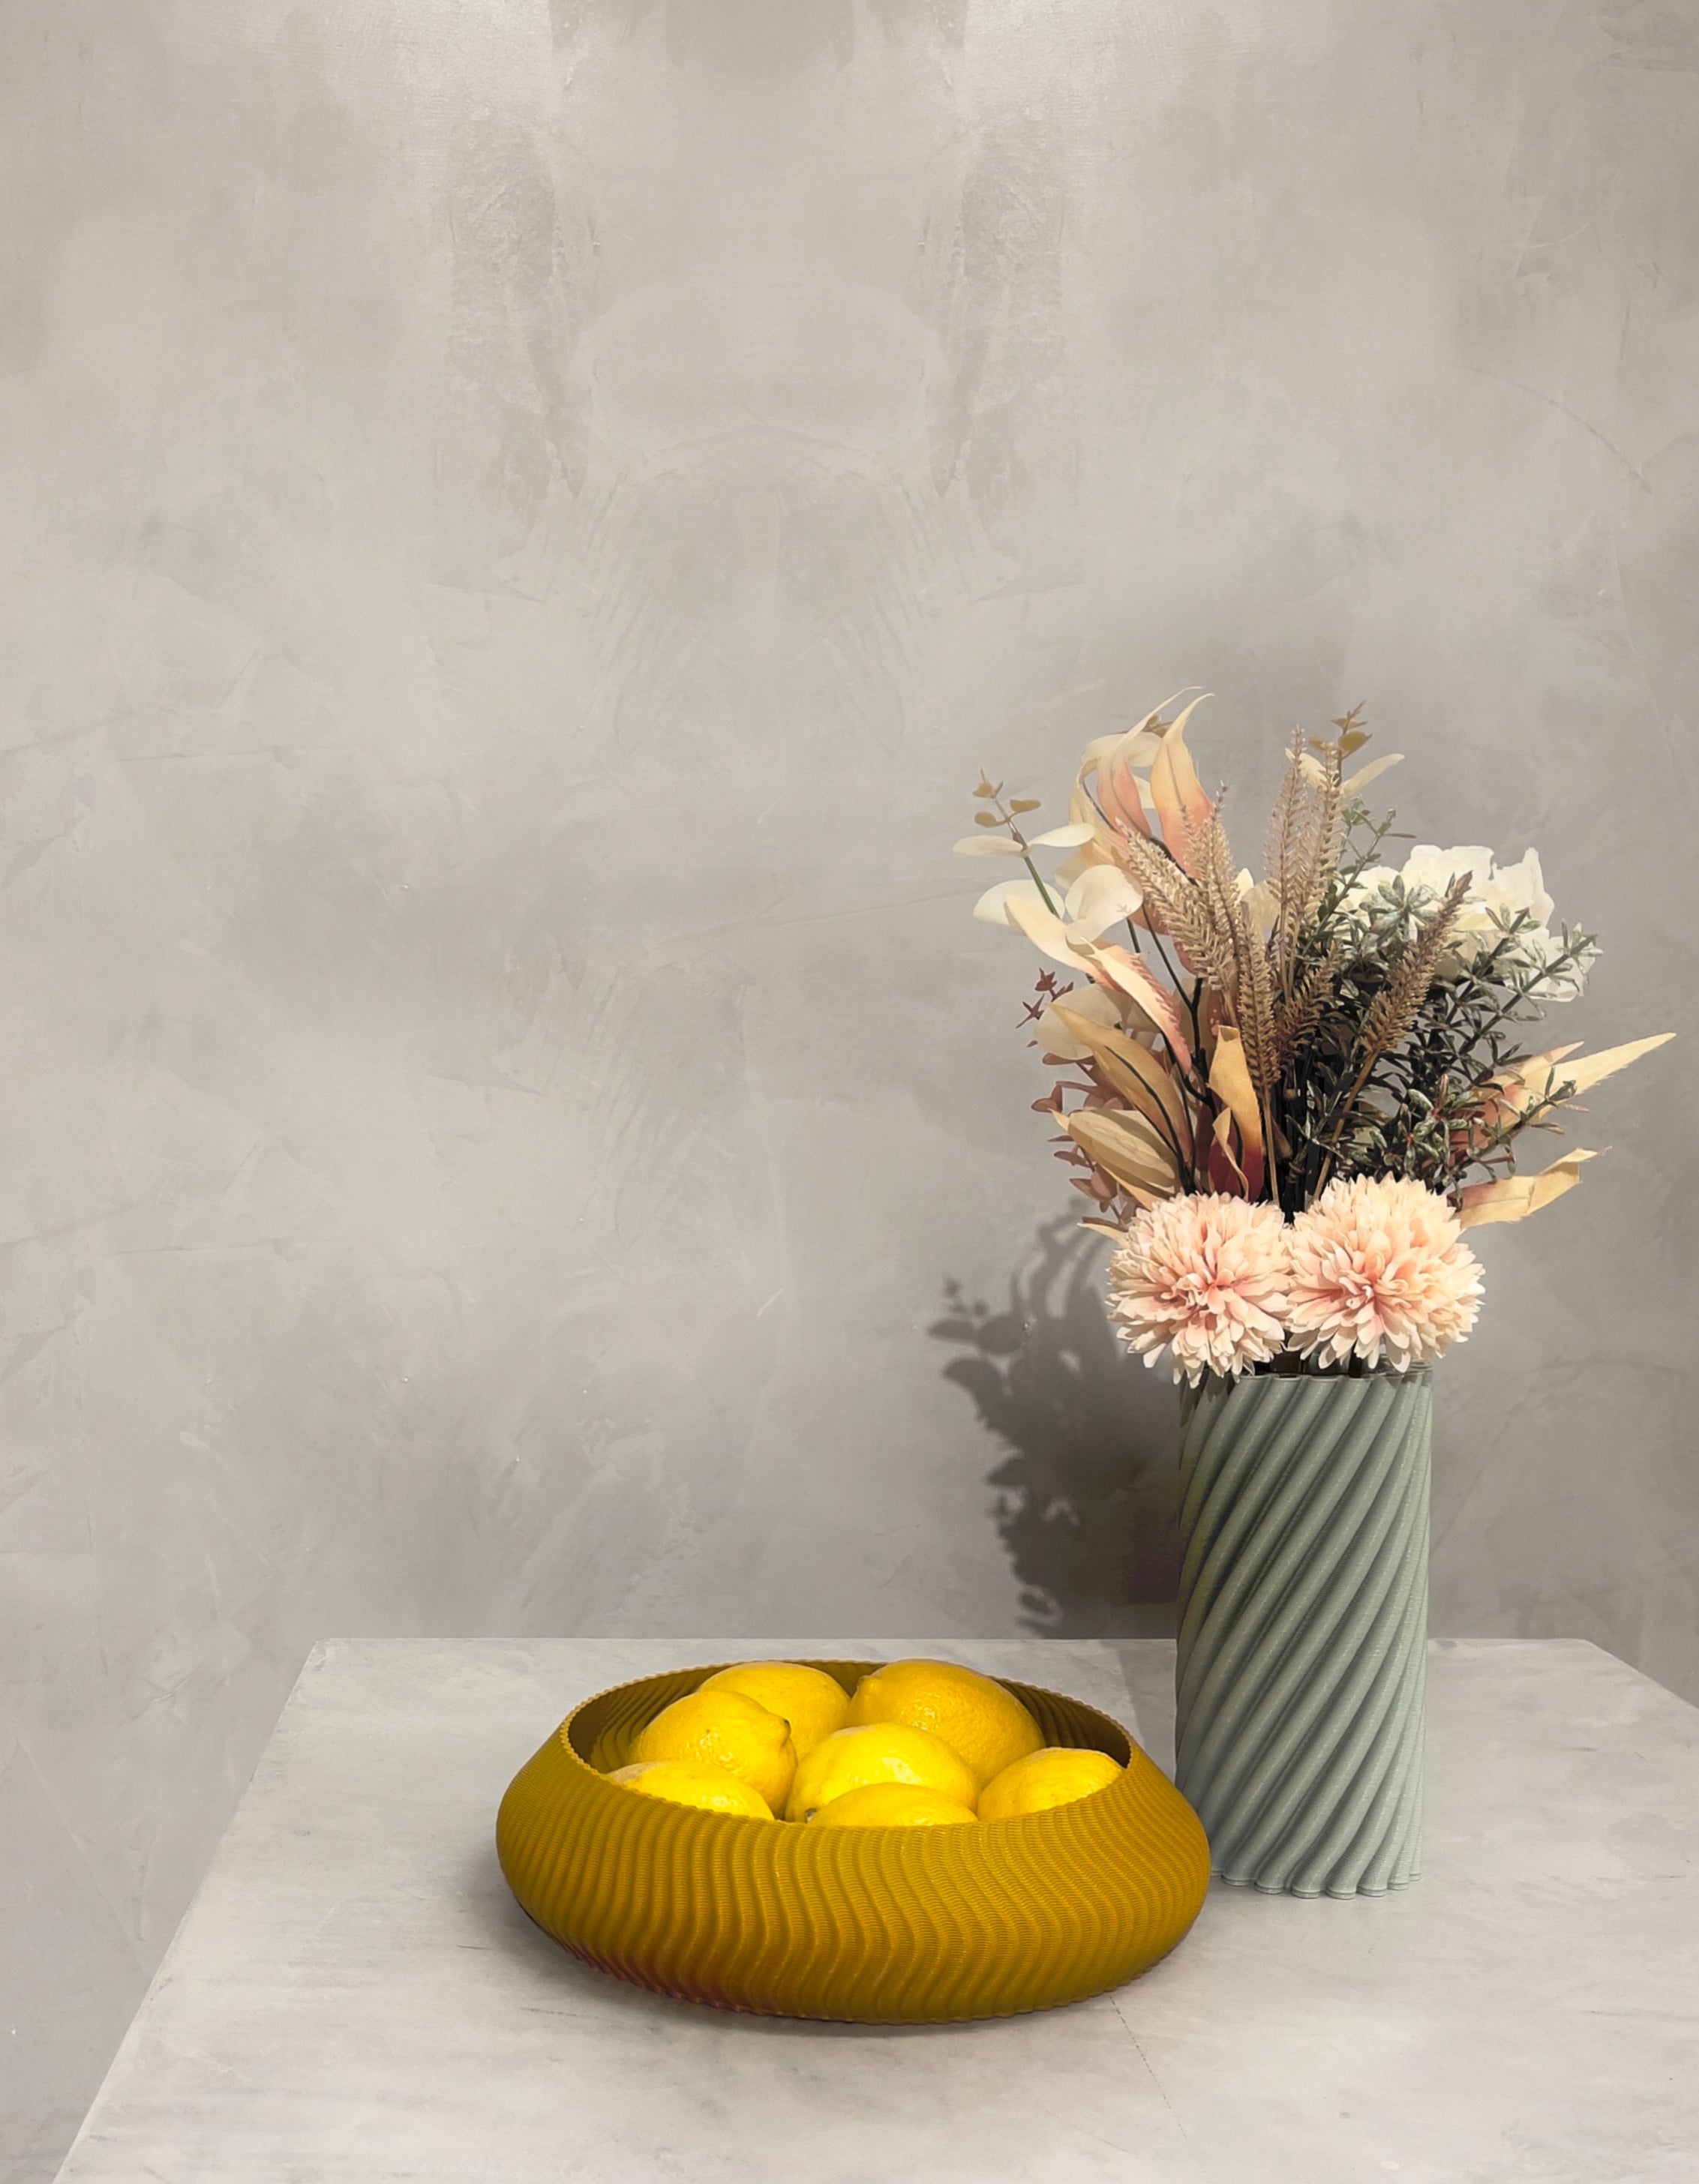 3D printed Kyma bowl with fruit and Strofi vase with flower bouquet made with recycled plastic by Deme Design, pictured on a pedestal